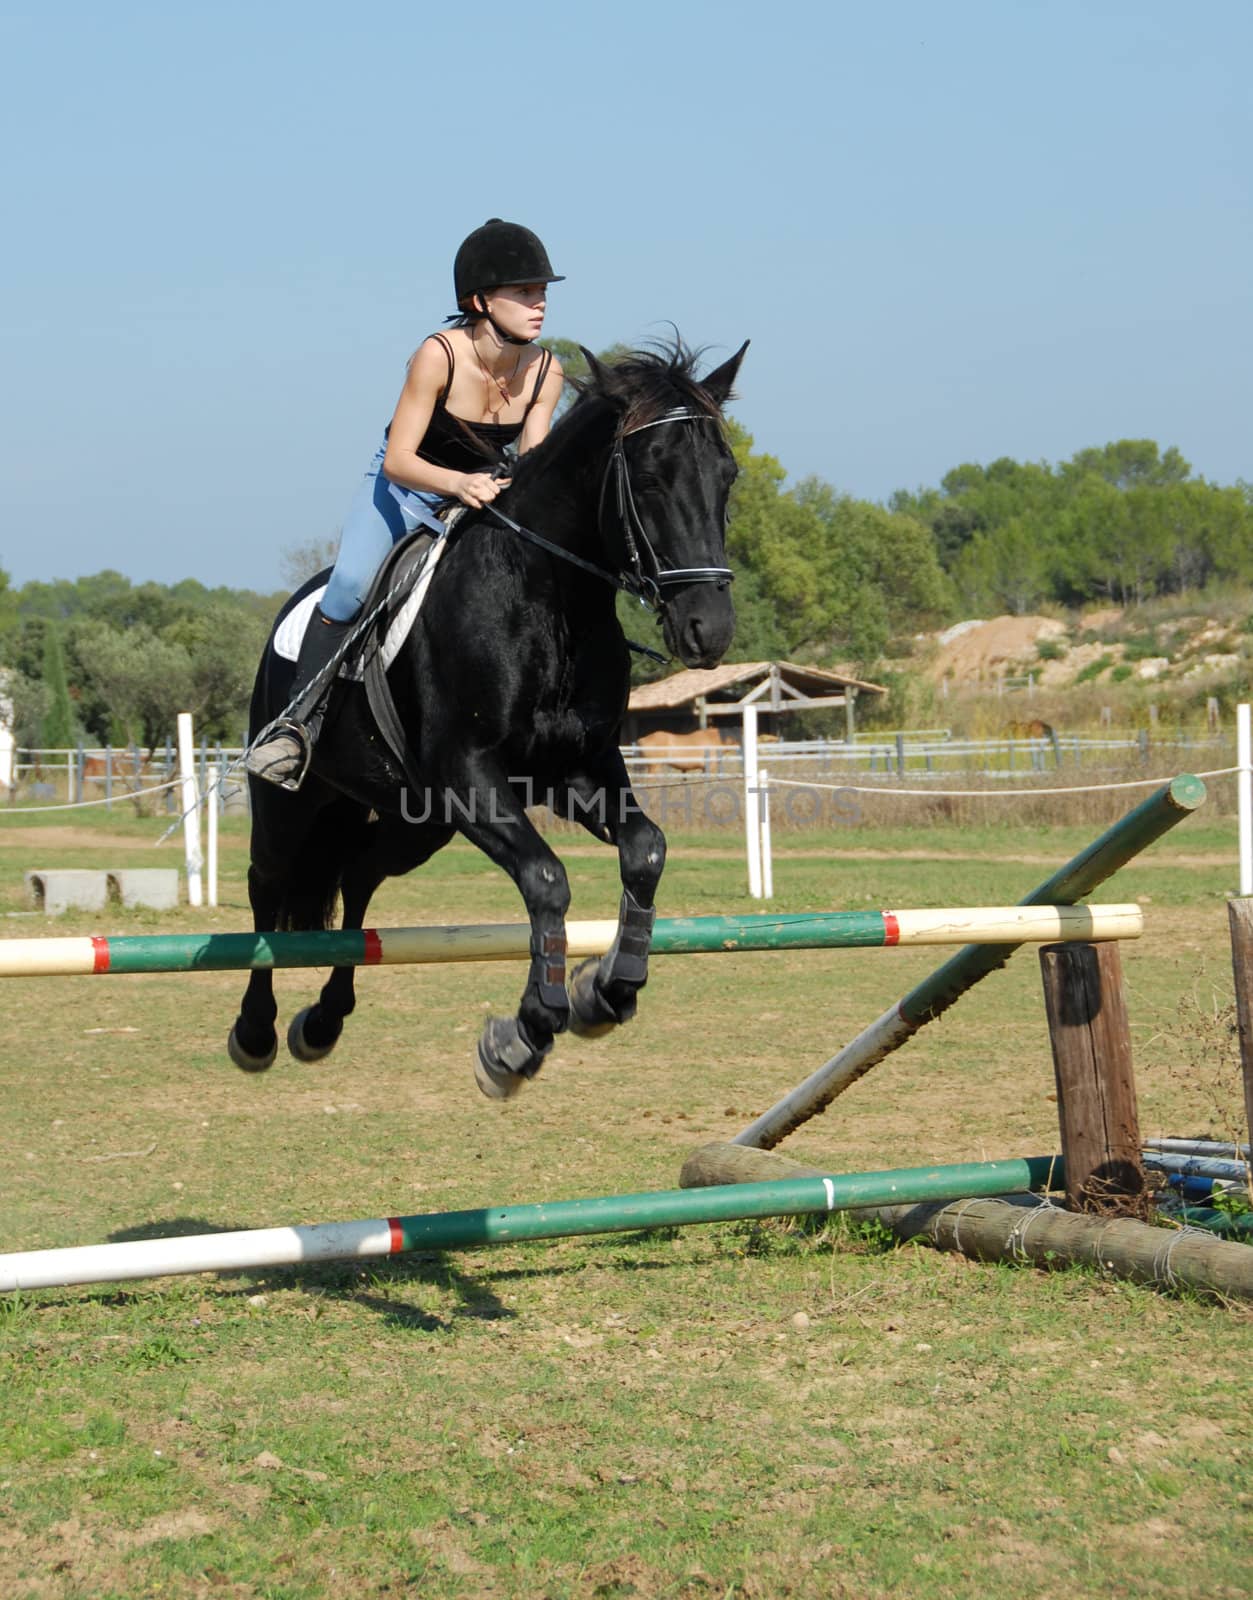 young teenager and her black stallion training for a competition of jumping

